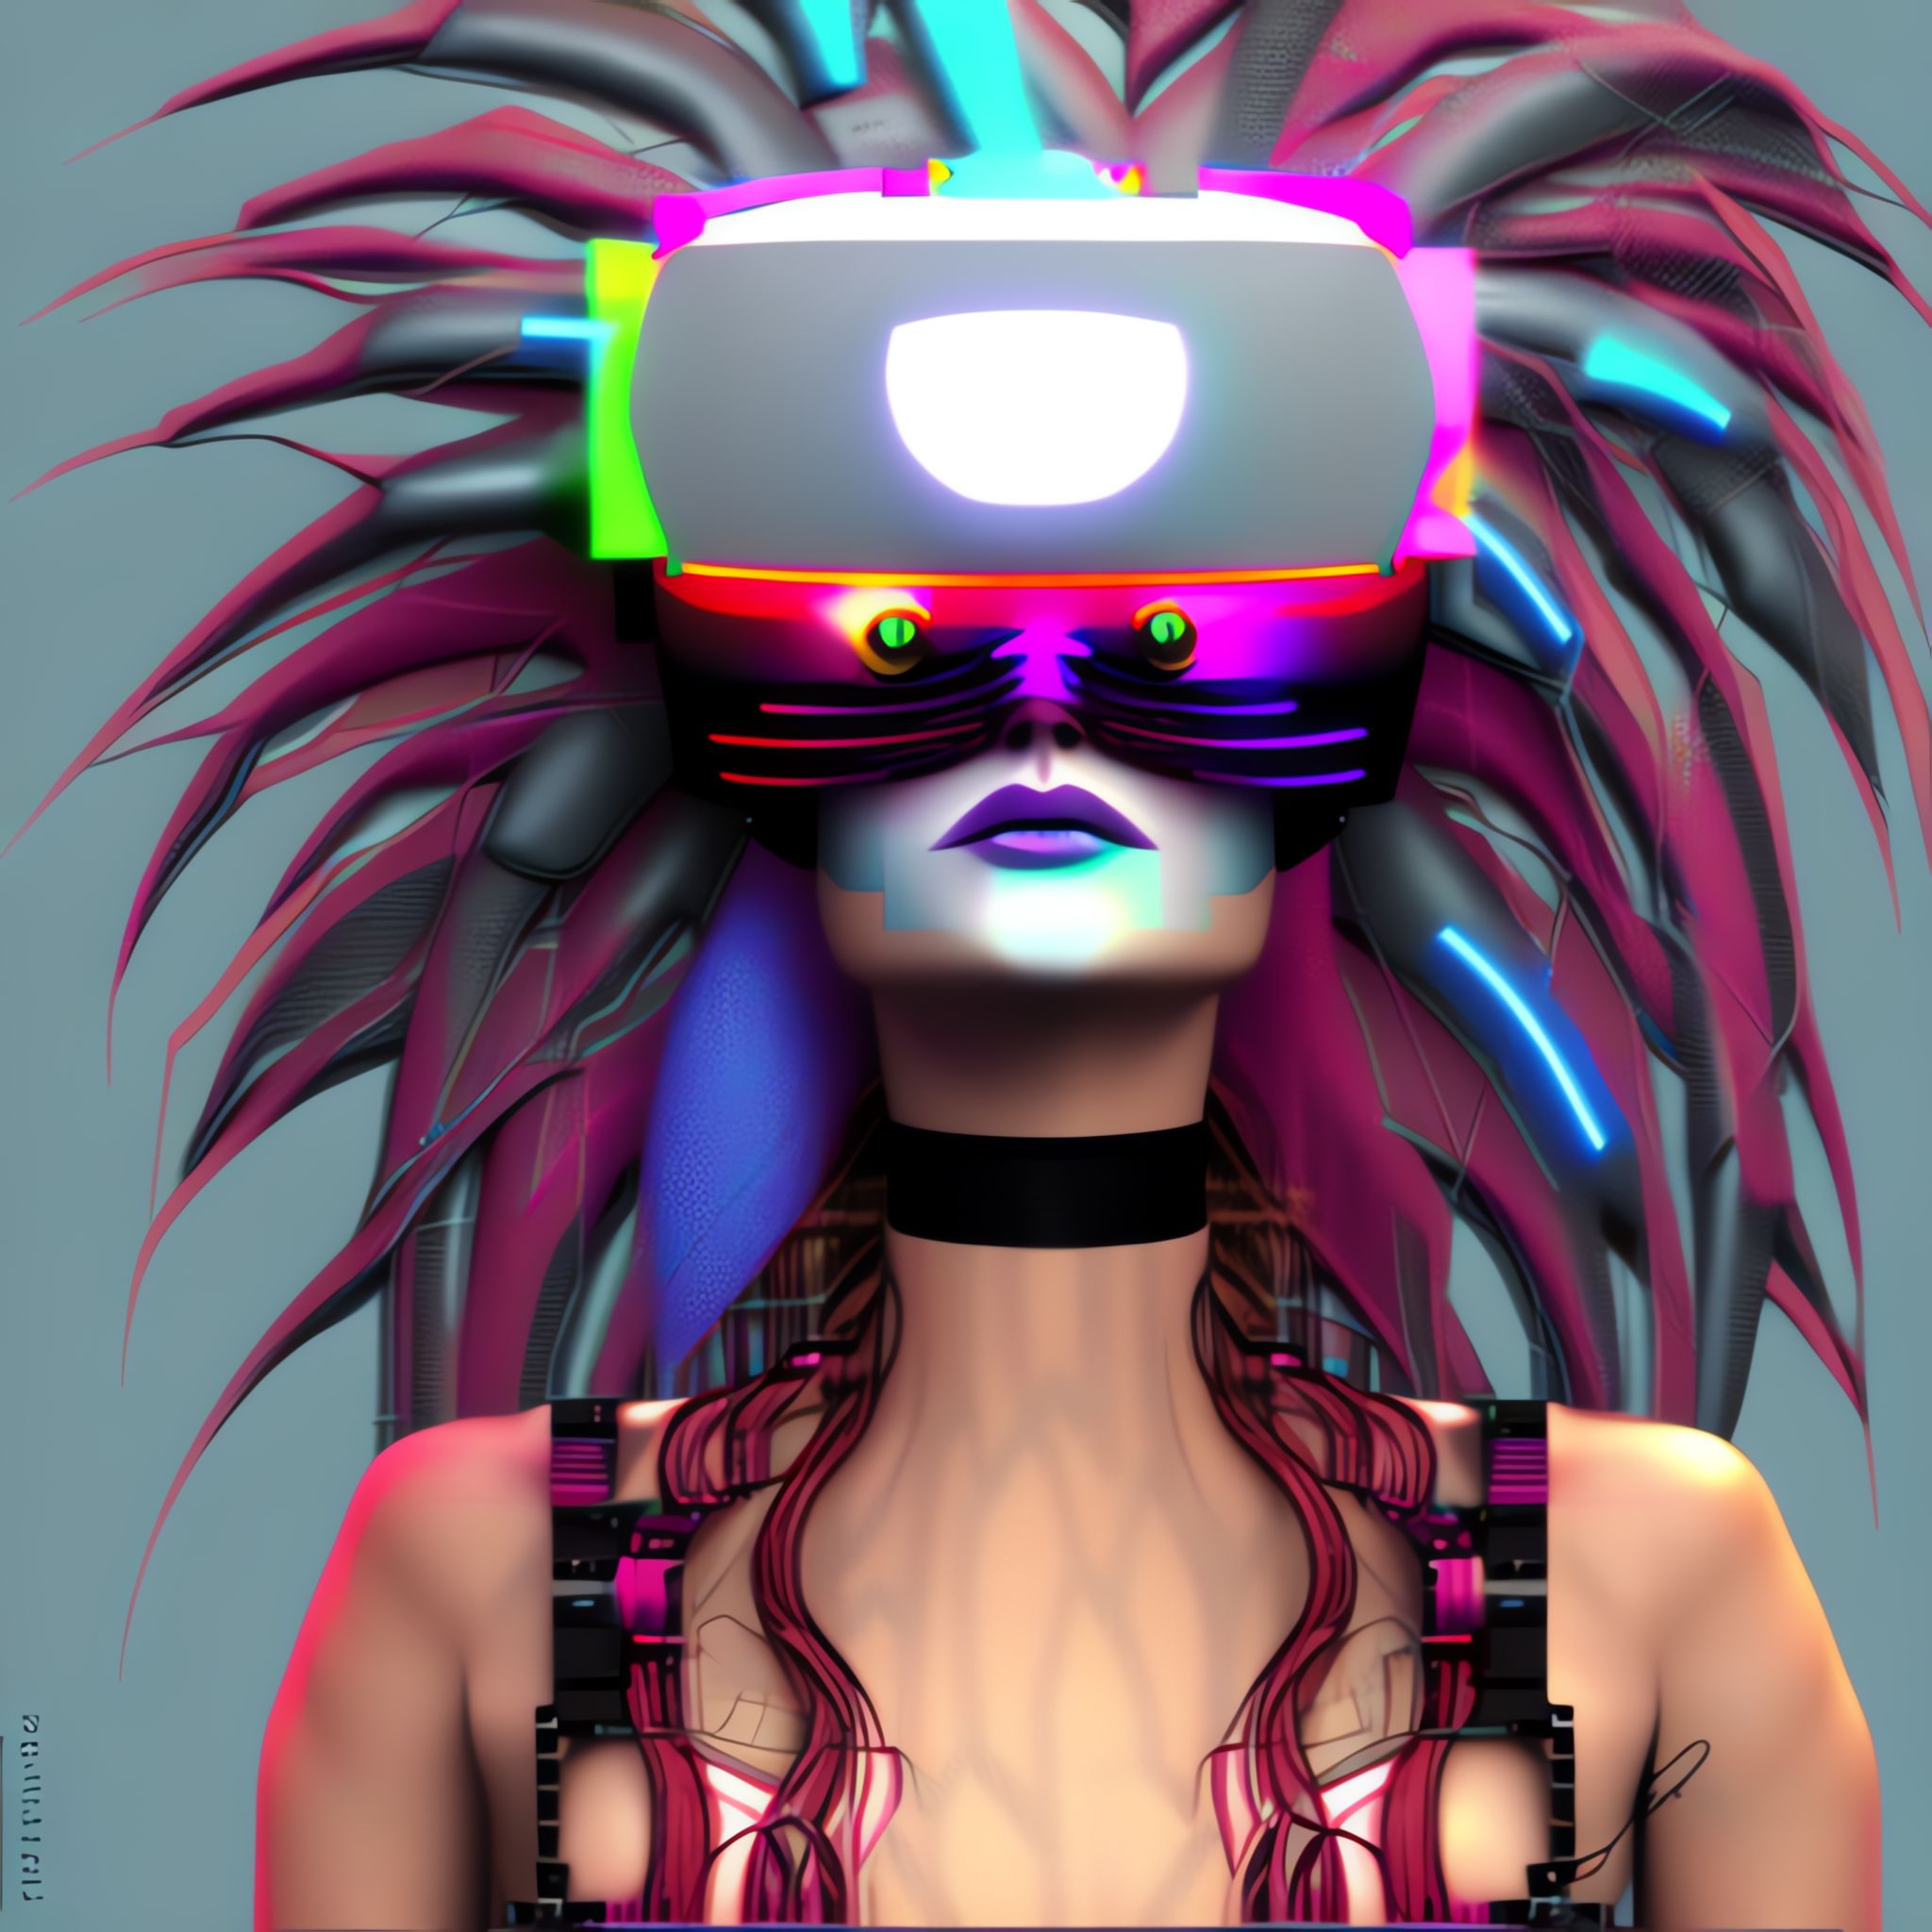 Head-of-girl-with-VR-headset-Wild-hair-colorful-makeup-Metaverse-Oculus-VR-Future-technical-d-c2ad